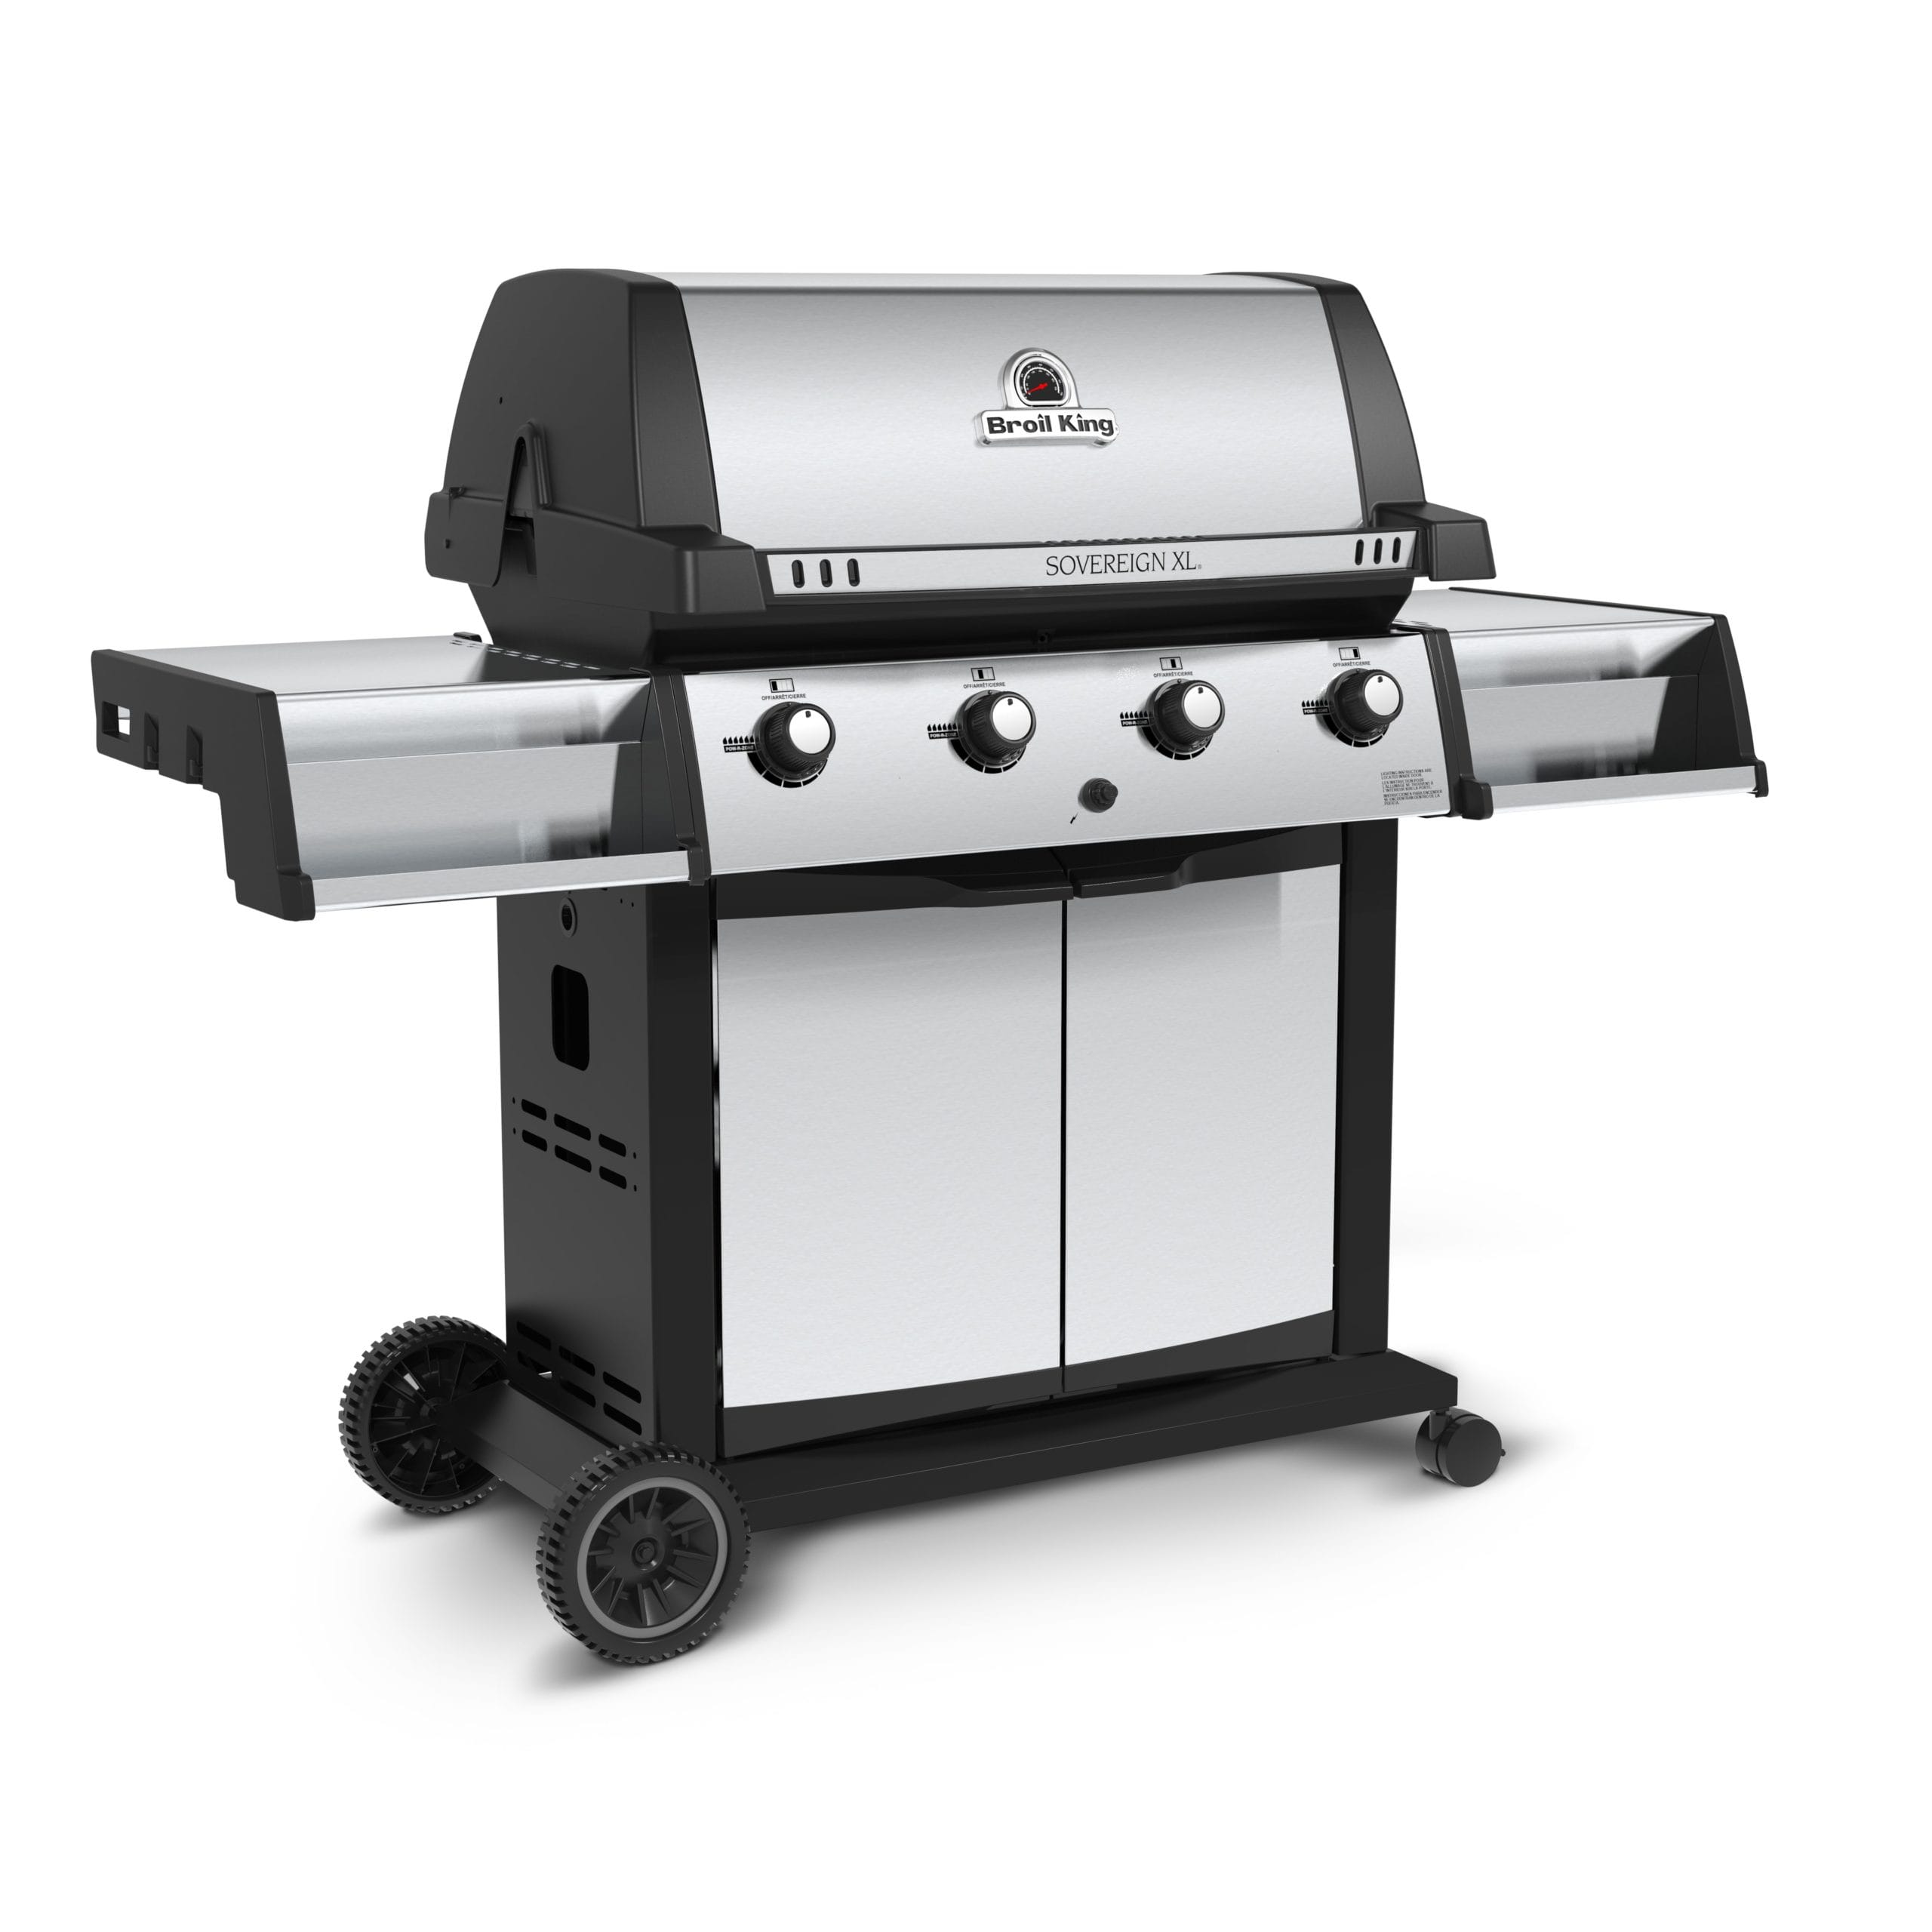 SovereignXLS20 Gas Grill by Broil King